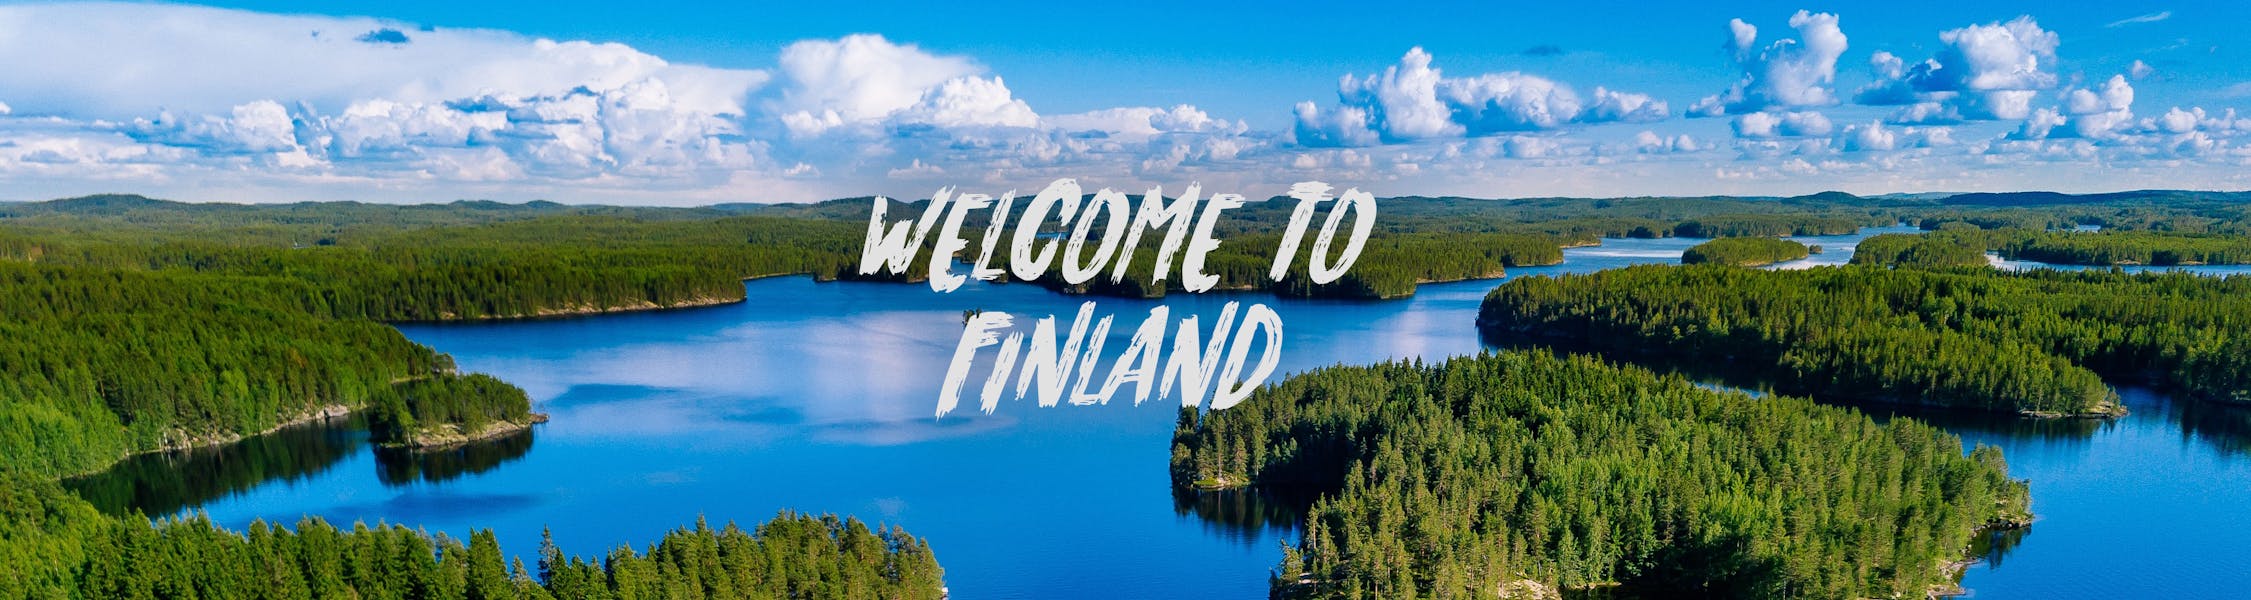 Not in Finland yet? Relocate!